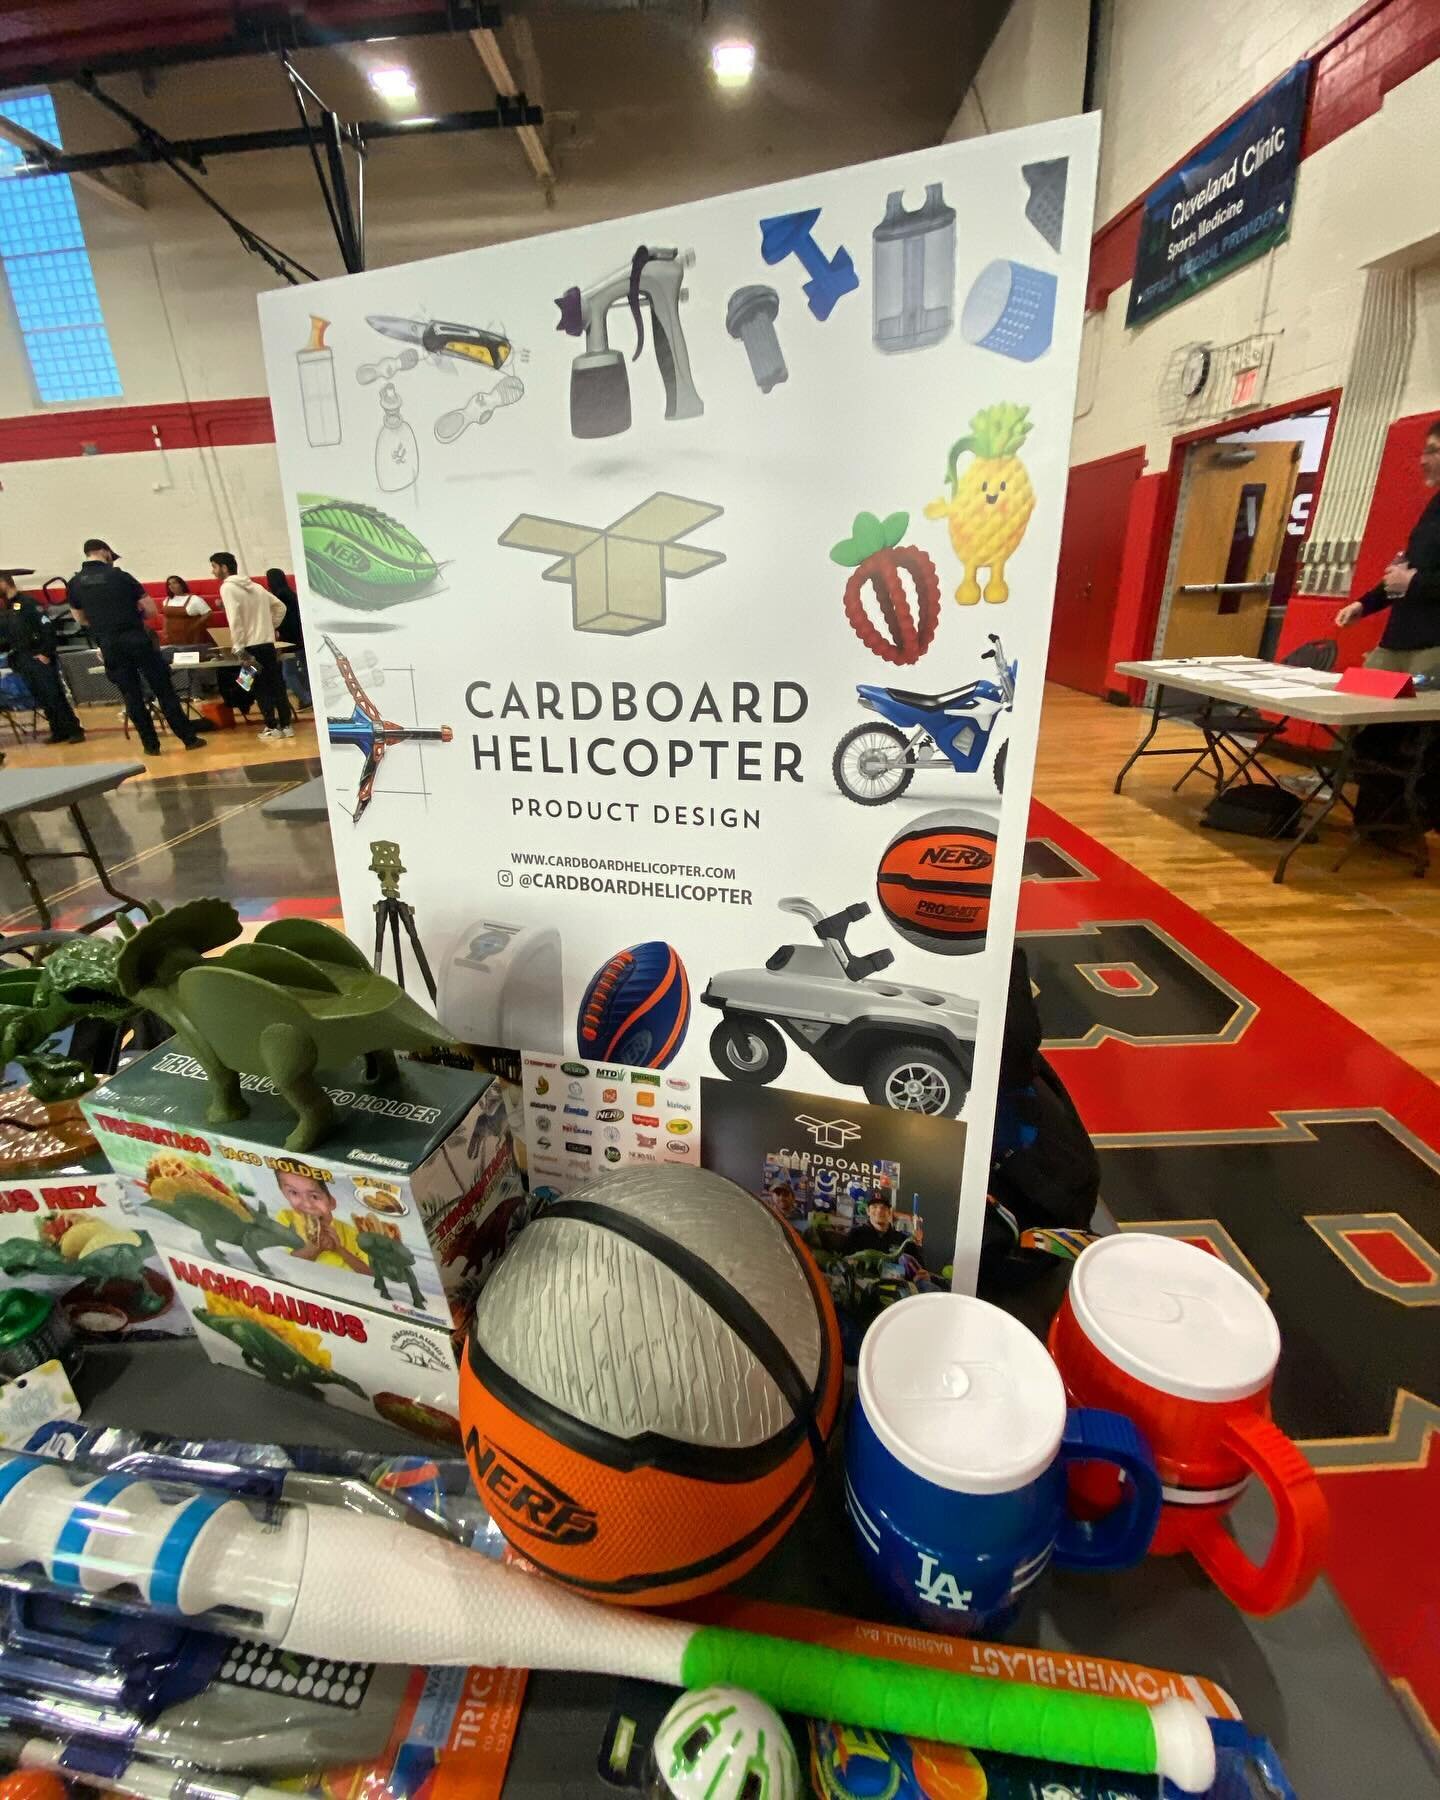 Had an amazing time last night at Fairview High School&rsquo;s career night! 🎓🏫 We had a table display where we spoke to students from sixth grade to 12th about product design and engineering professions. 💡🛠️ It was incredible to see their enthus